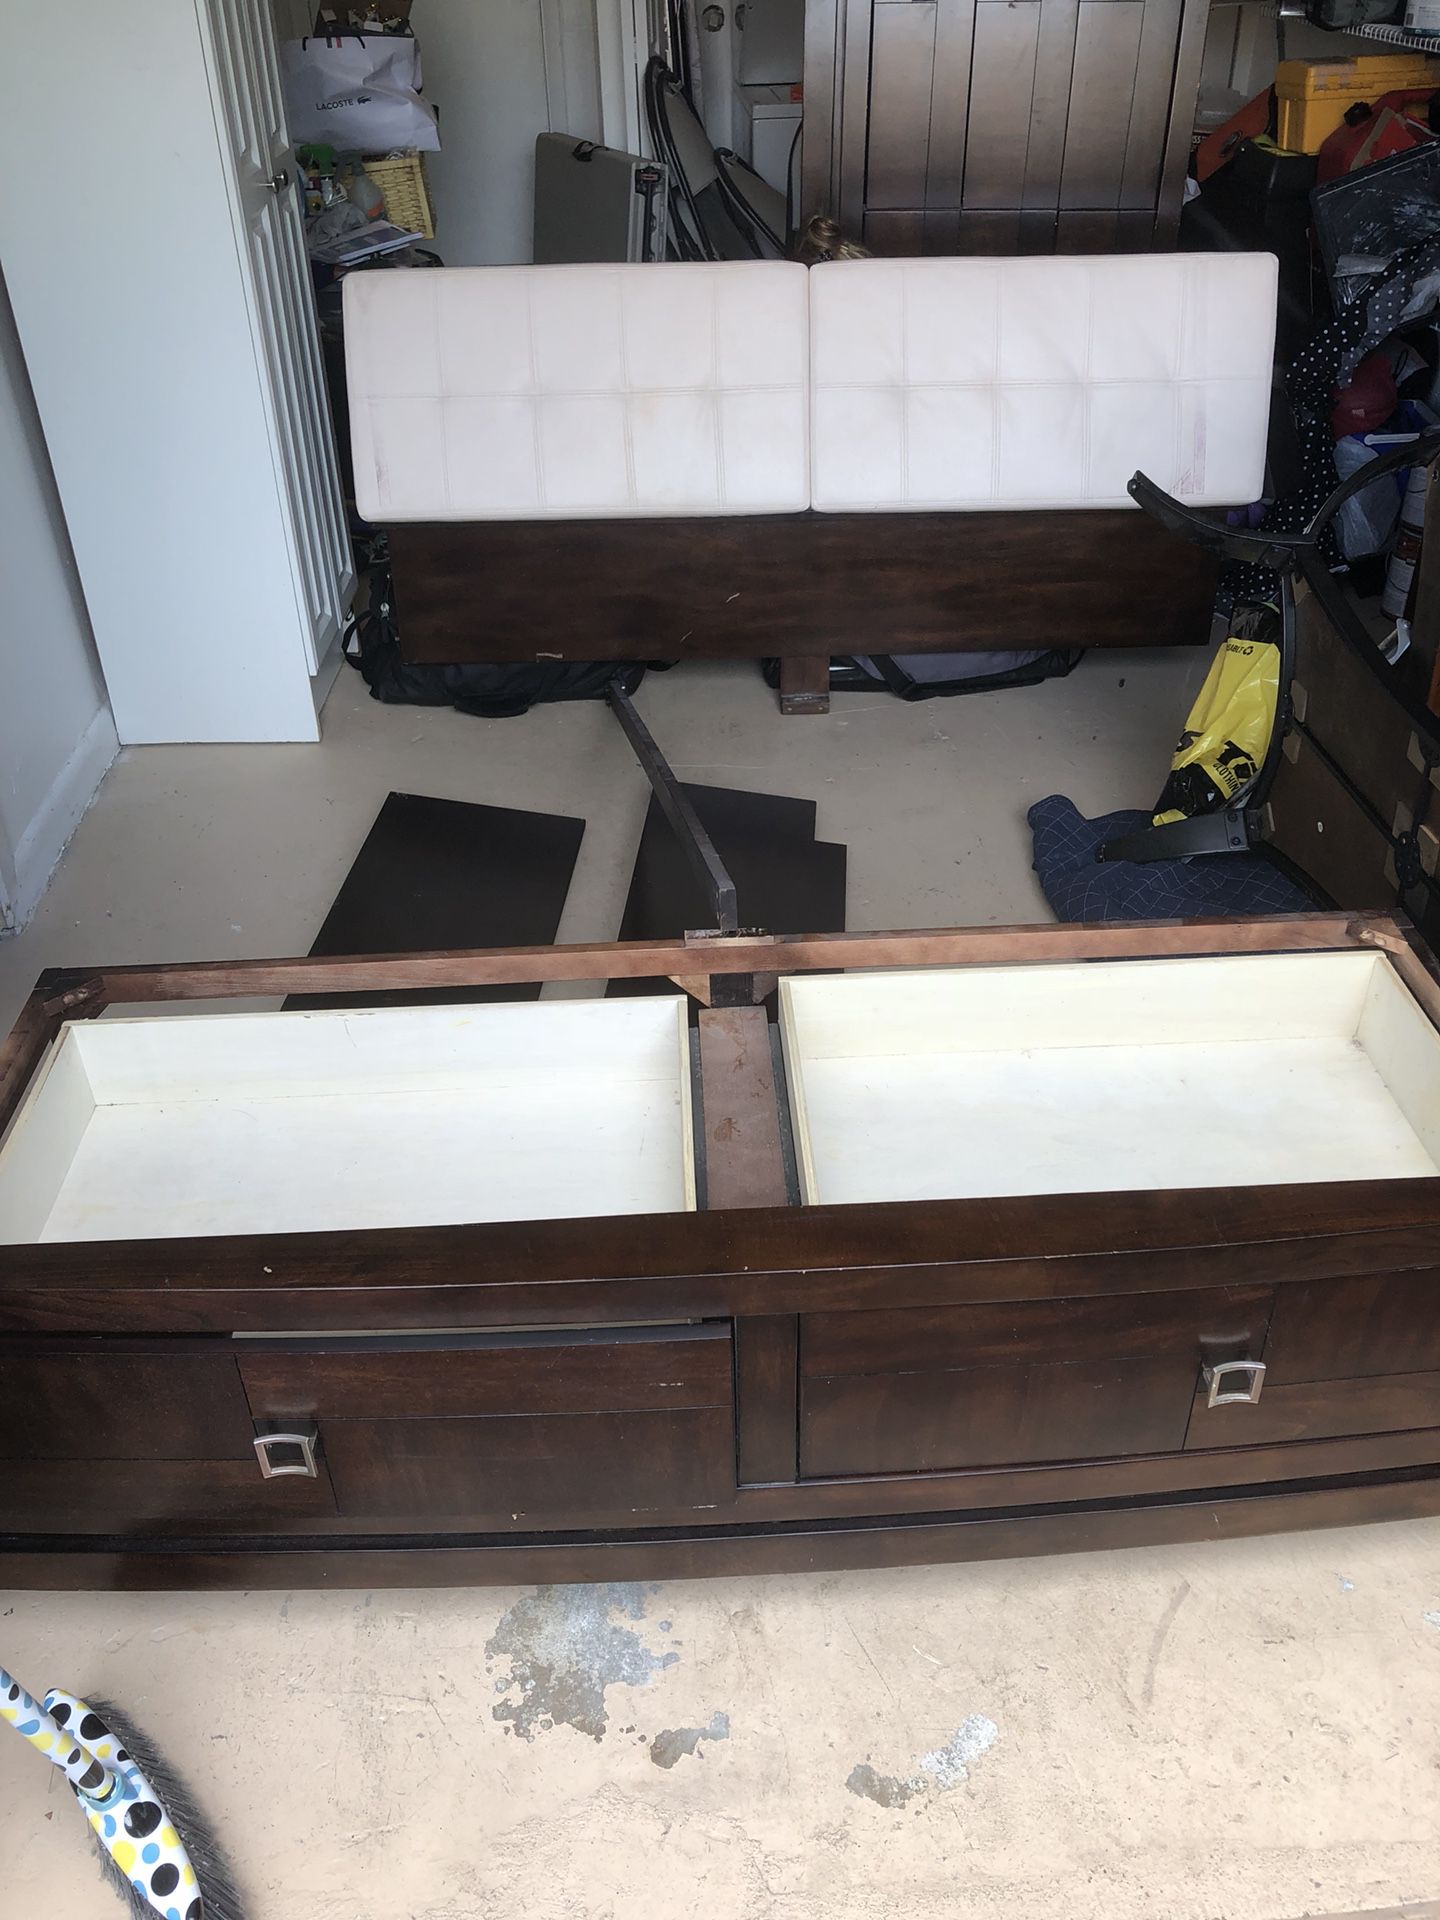 FOR FREE QUEEN NAJA EBONY BED/ EVERYTHING INCLUDED